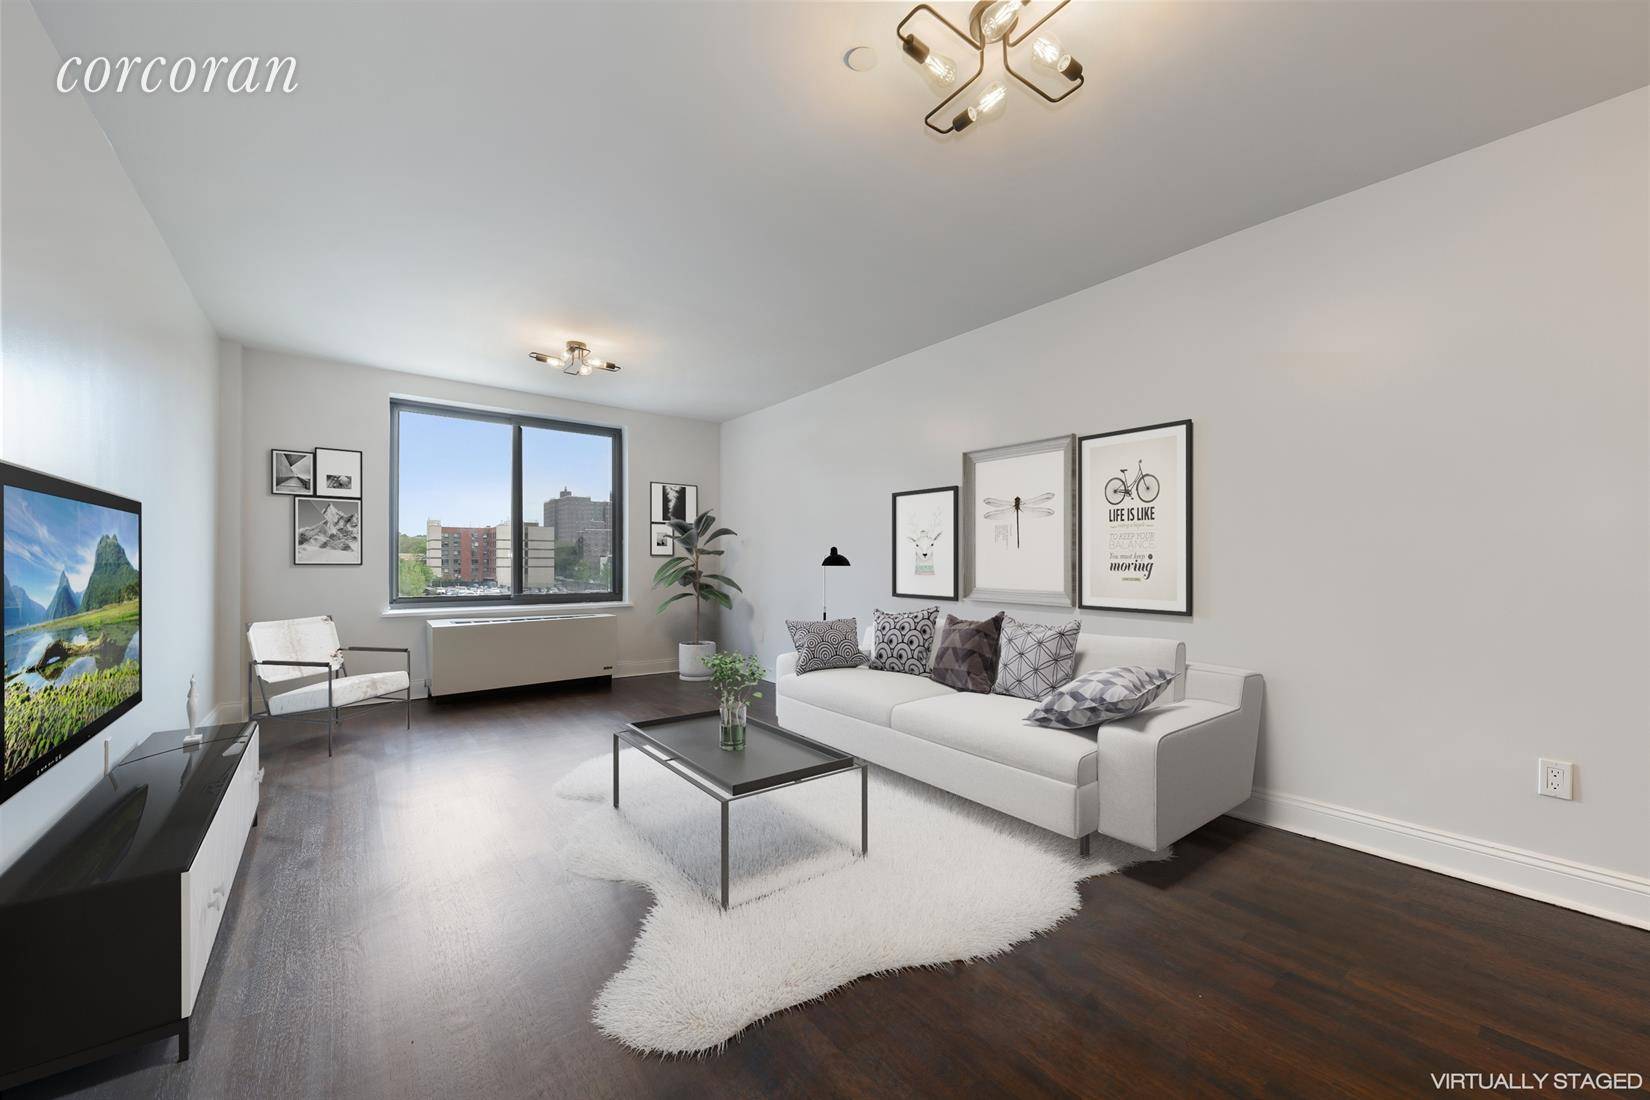 Do not miss this incredible opportunity to own a 2 bedroom, 2 bathroom condo in East Williamsburg at an incredible value.